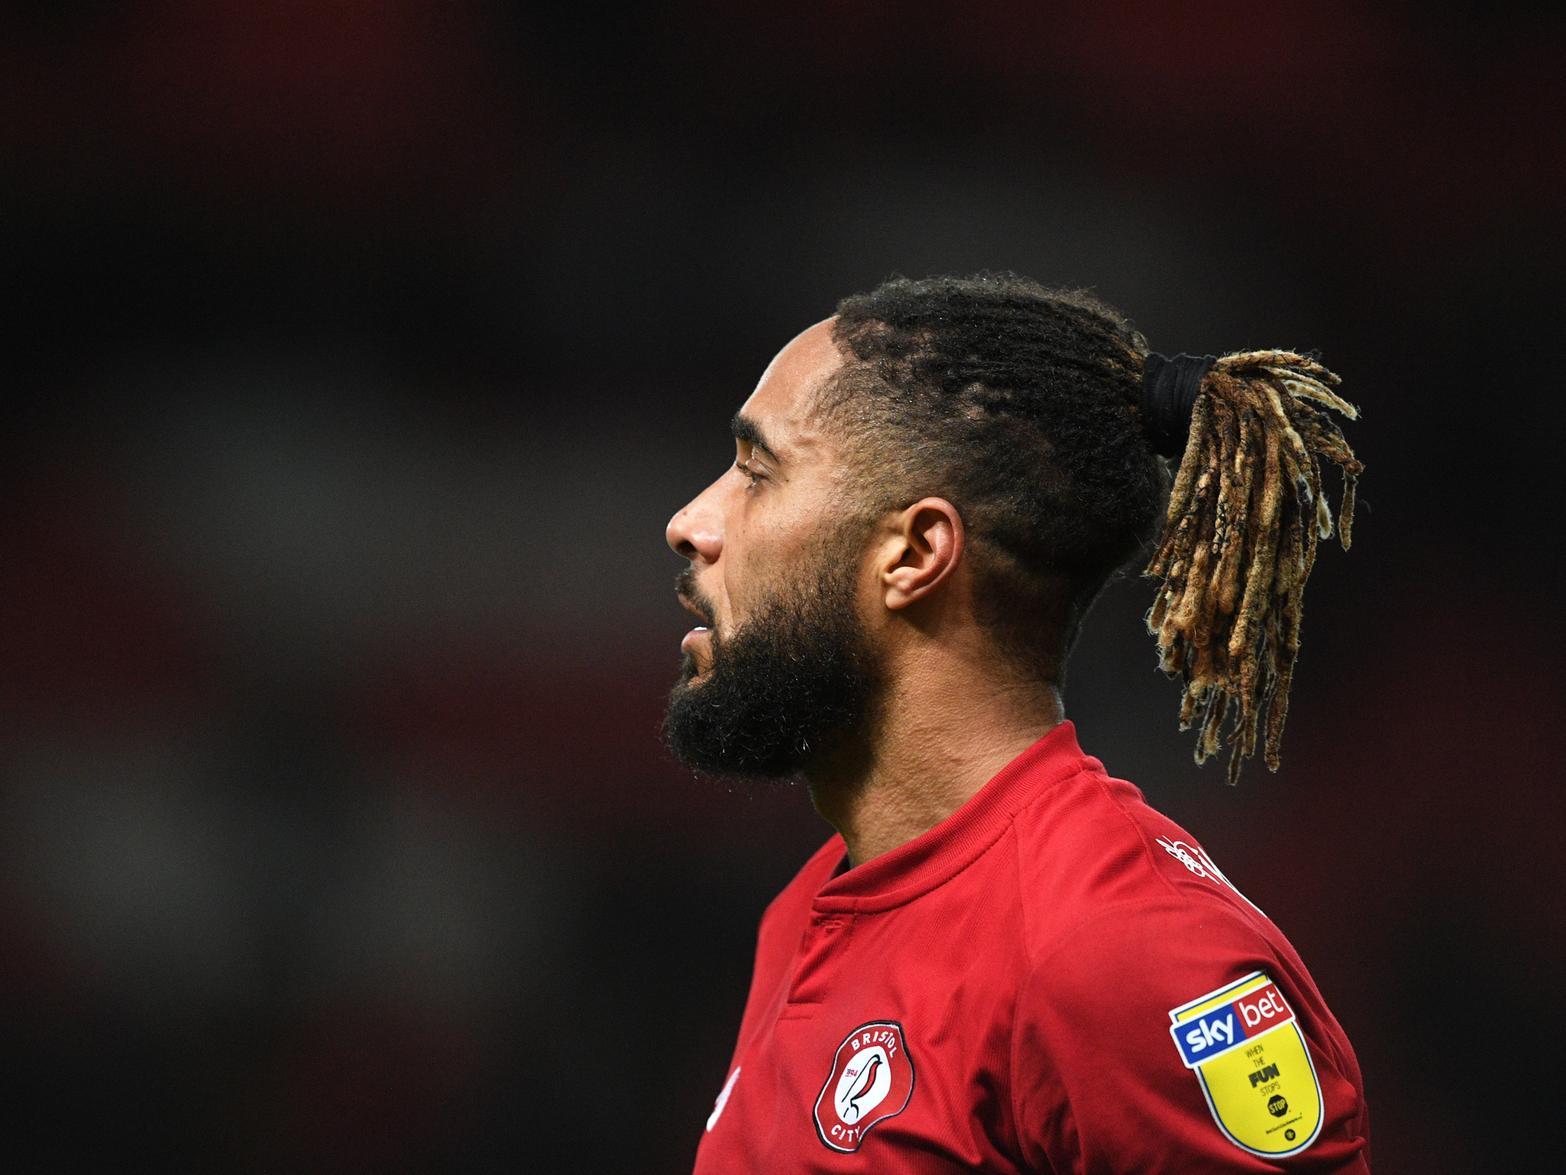 Bristol City manager Lee Johnson has revealed he's hopeful of keeping veteran defender Ashley Williams at the club, despite a host of foreign sides being tipped to make him a tempting pre-contract offer. (Bristol Post)